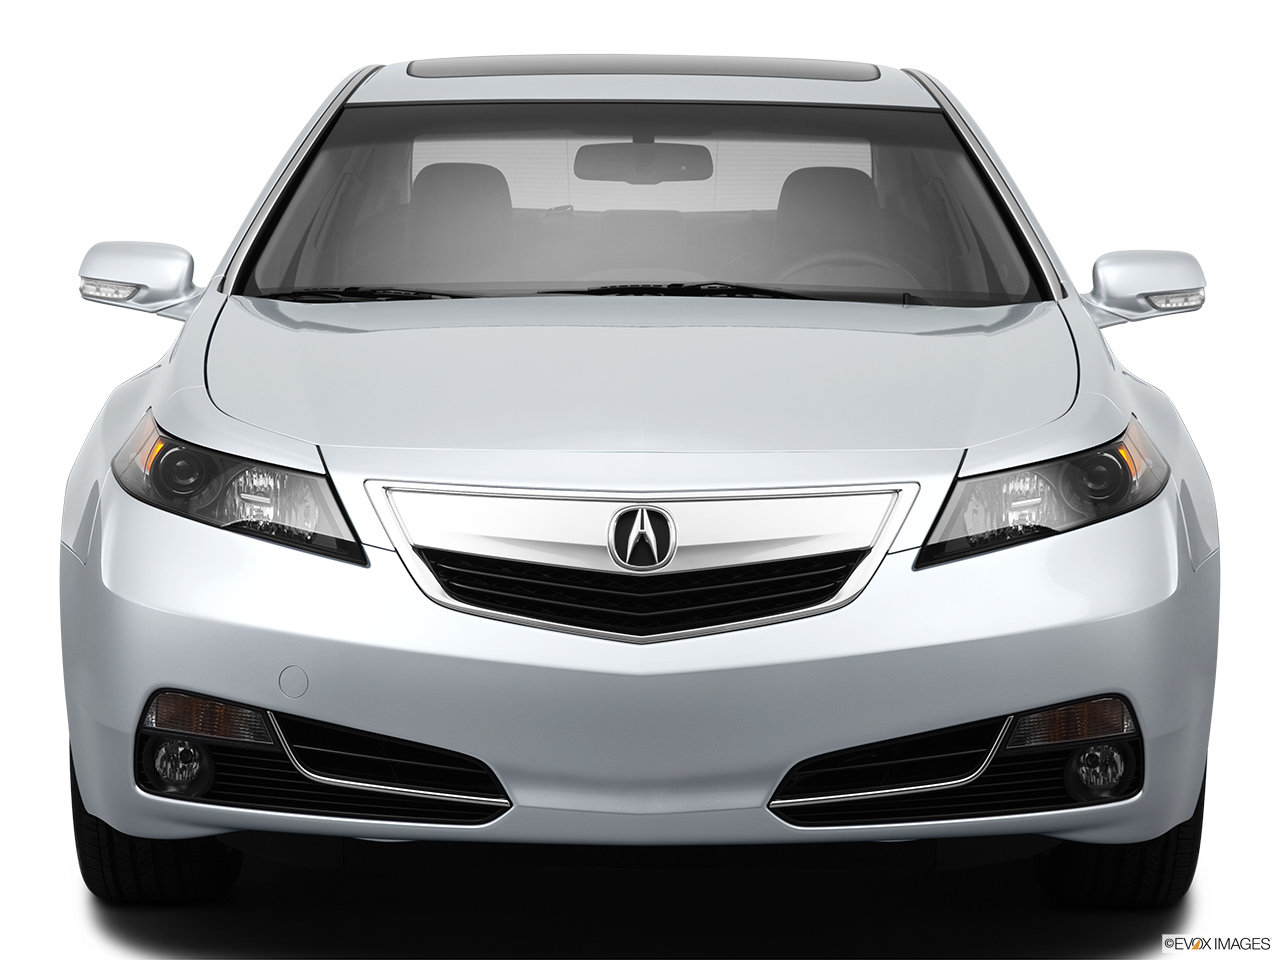 2013 Acura TL SH-AWD Low/wide front. 